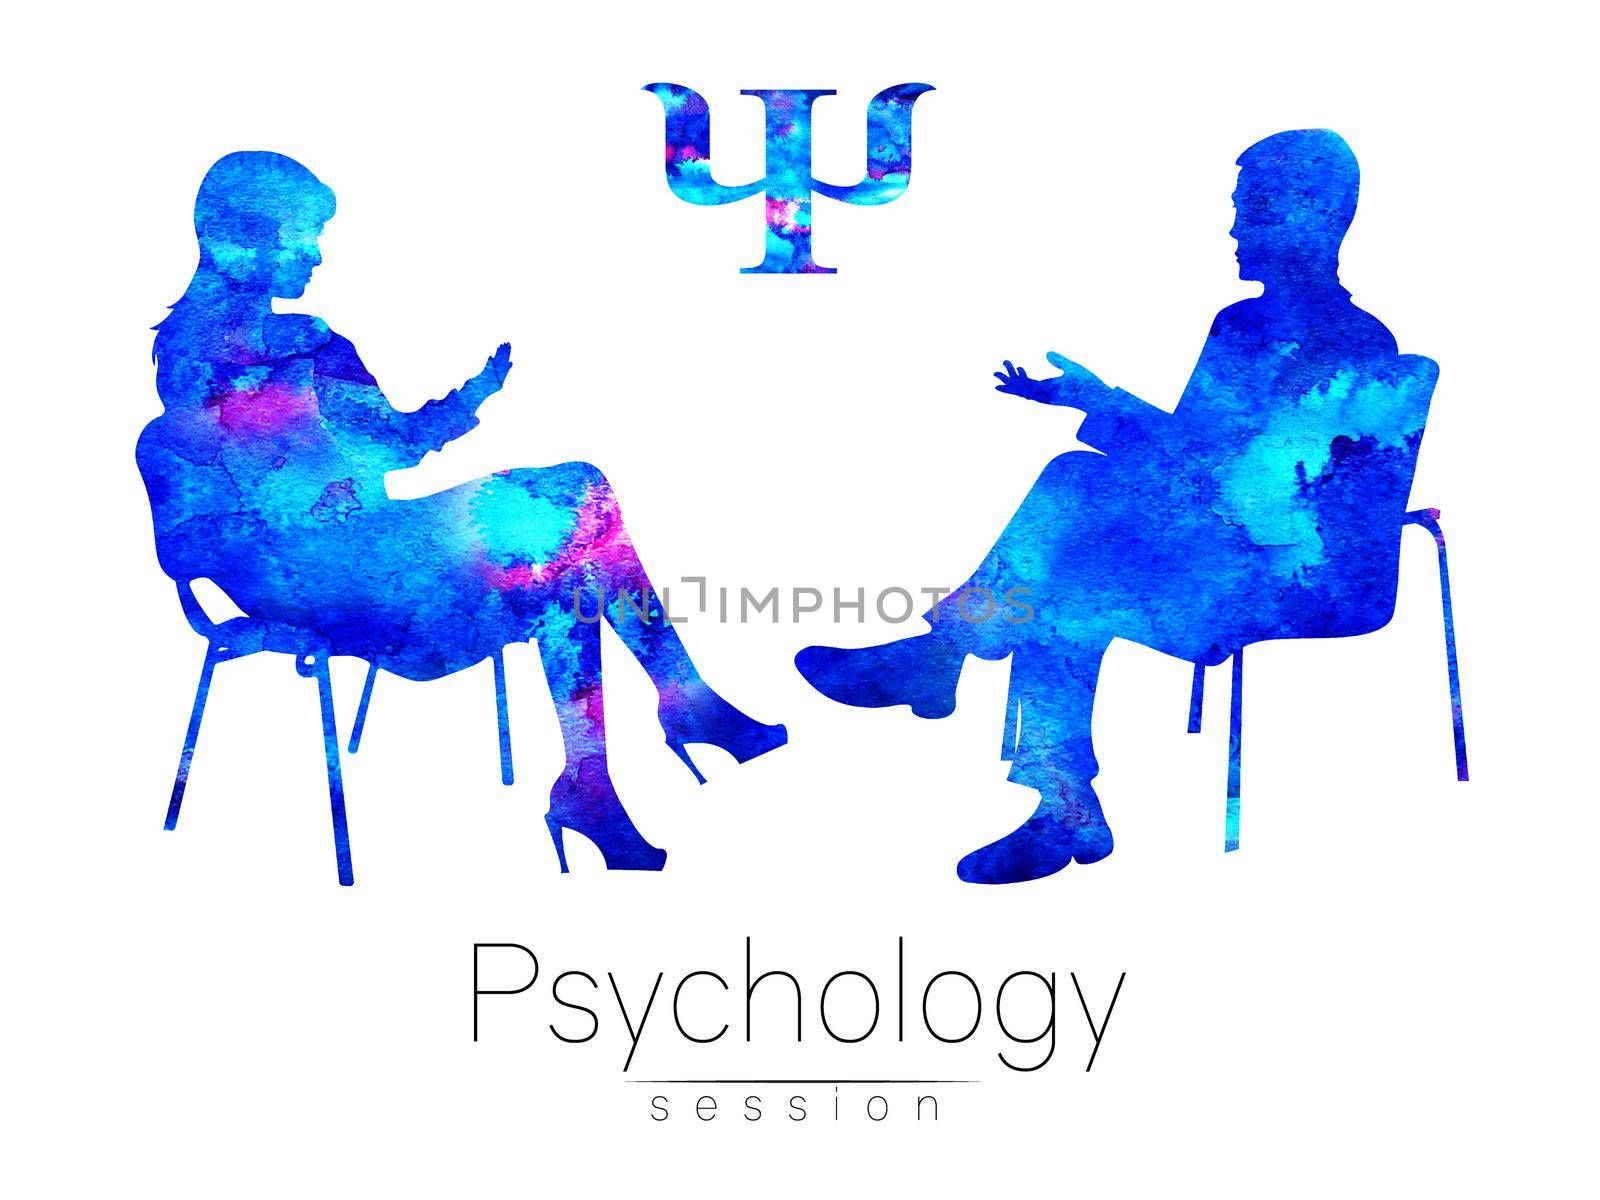 The psychologist and the client. Psychotherapy. Psycho therapeutic session. Psychological counseling. Man woman talking while sitting. Silhouette. Blue profile. Modern symbol logo. Design concept sign